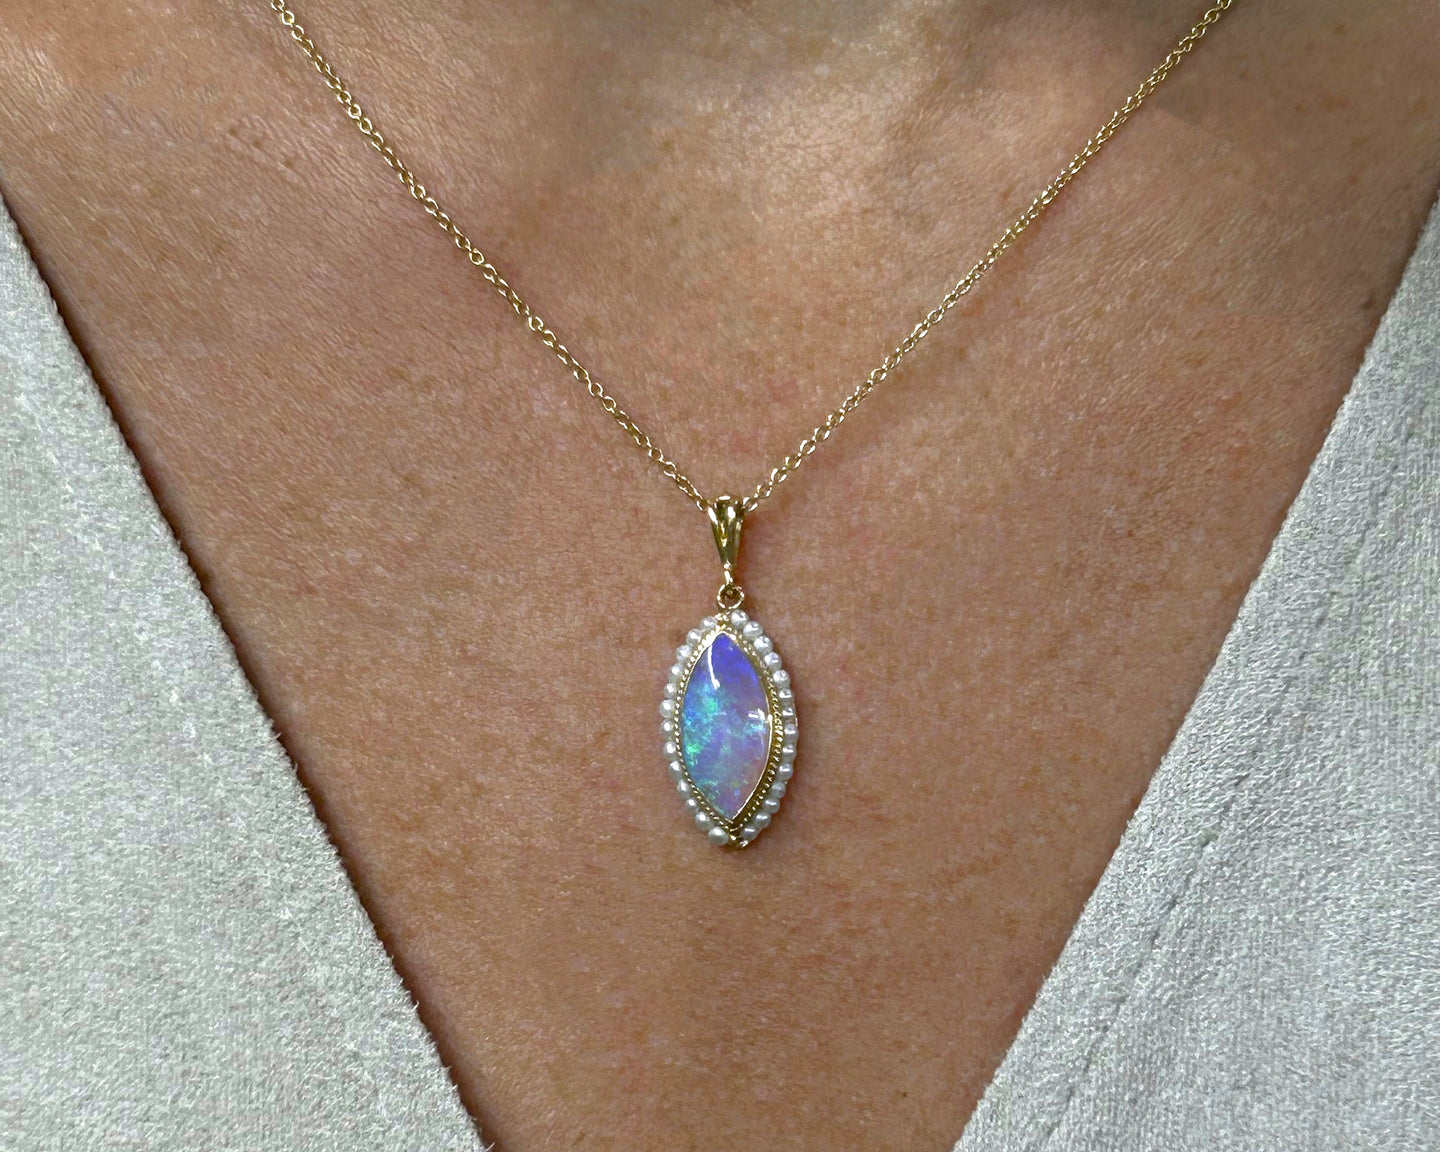 Vintage 14K yellow gold opal and seed pearl pendant necklace.